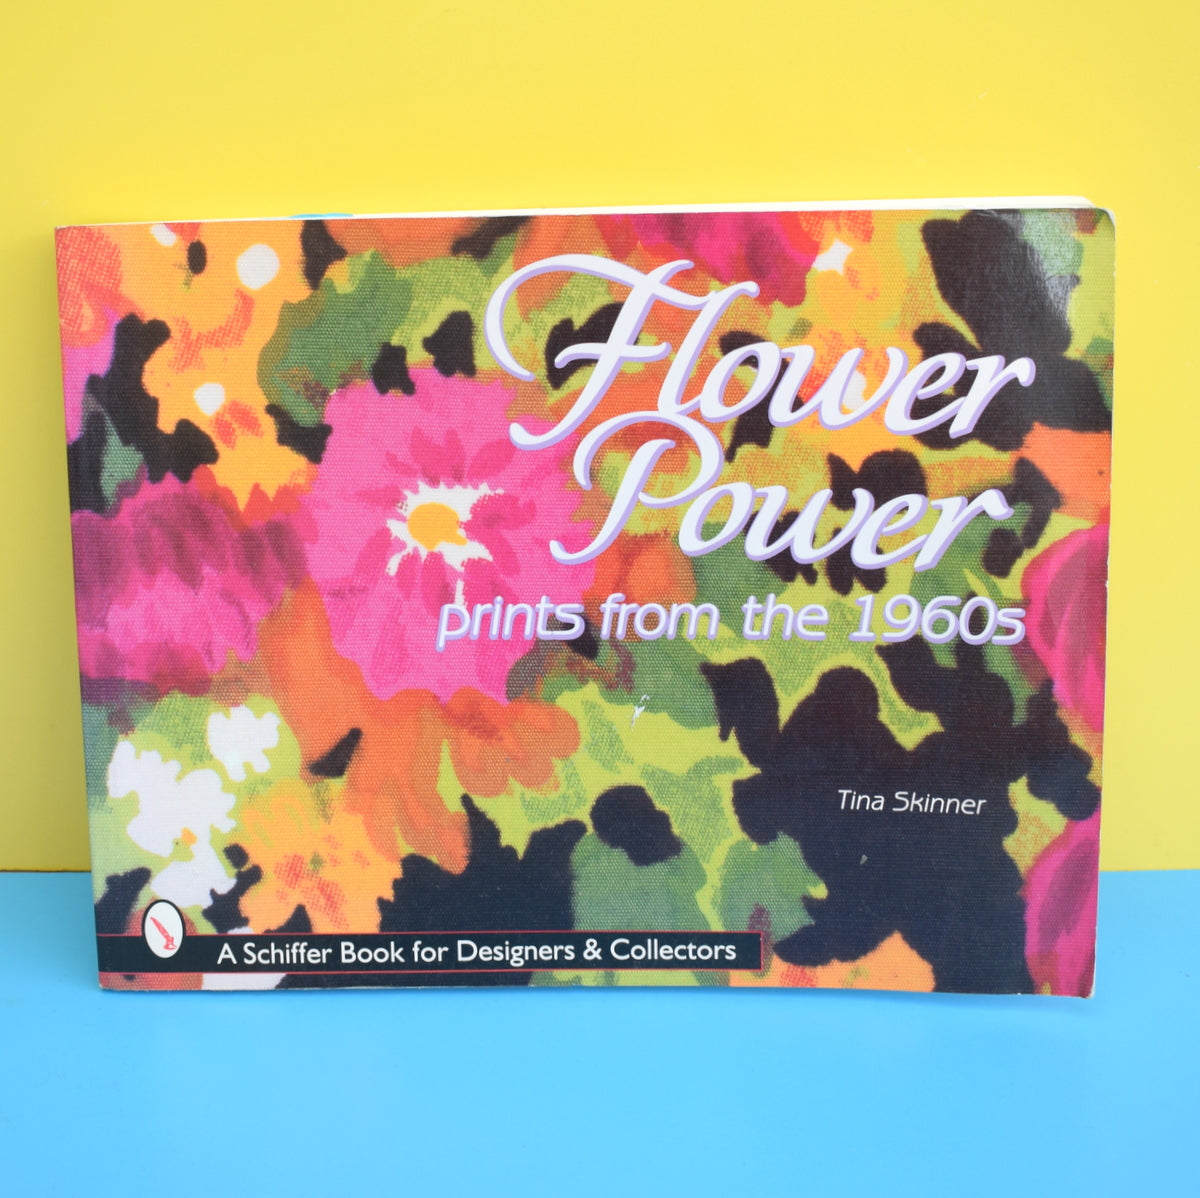 Retro Book - Flower Power Prints from The 1960s - Schiffer Book for Designers & Collectors